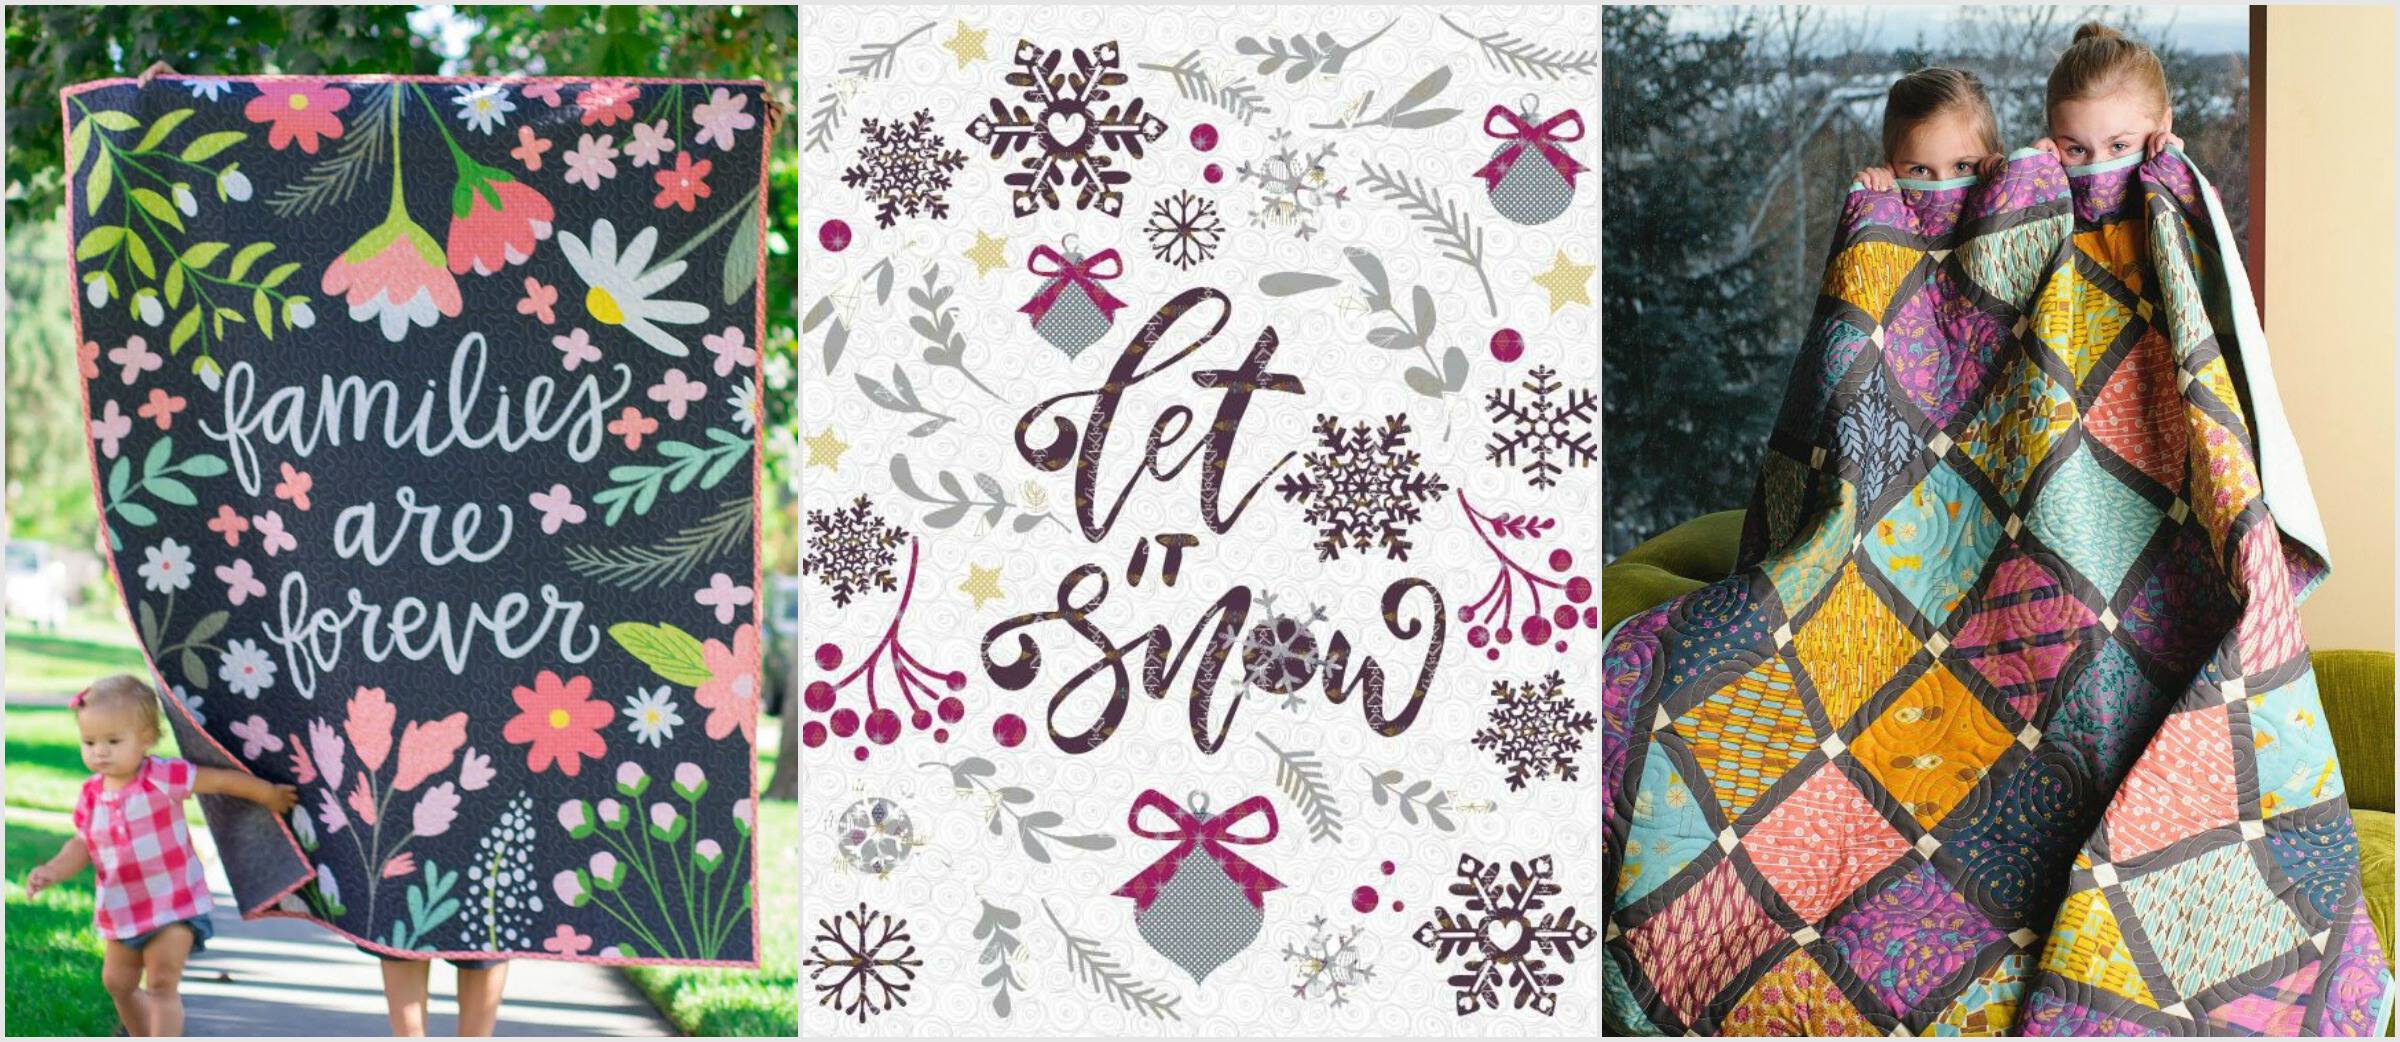 Stitched Custom Quilts makes the most beautiful handmade customized quilts. Personalize them with text, colors, and more. A beautiful gift idea!